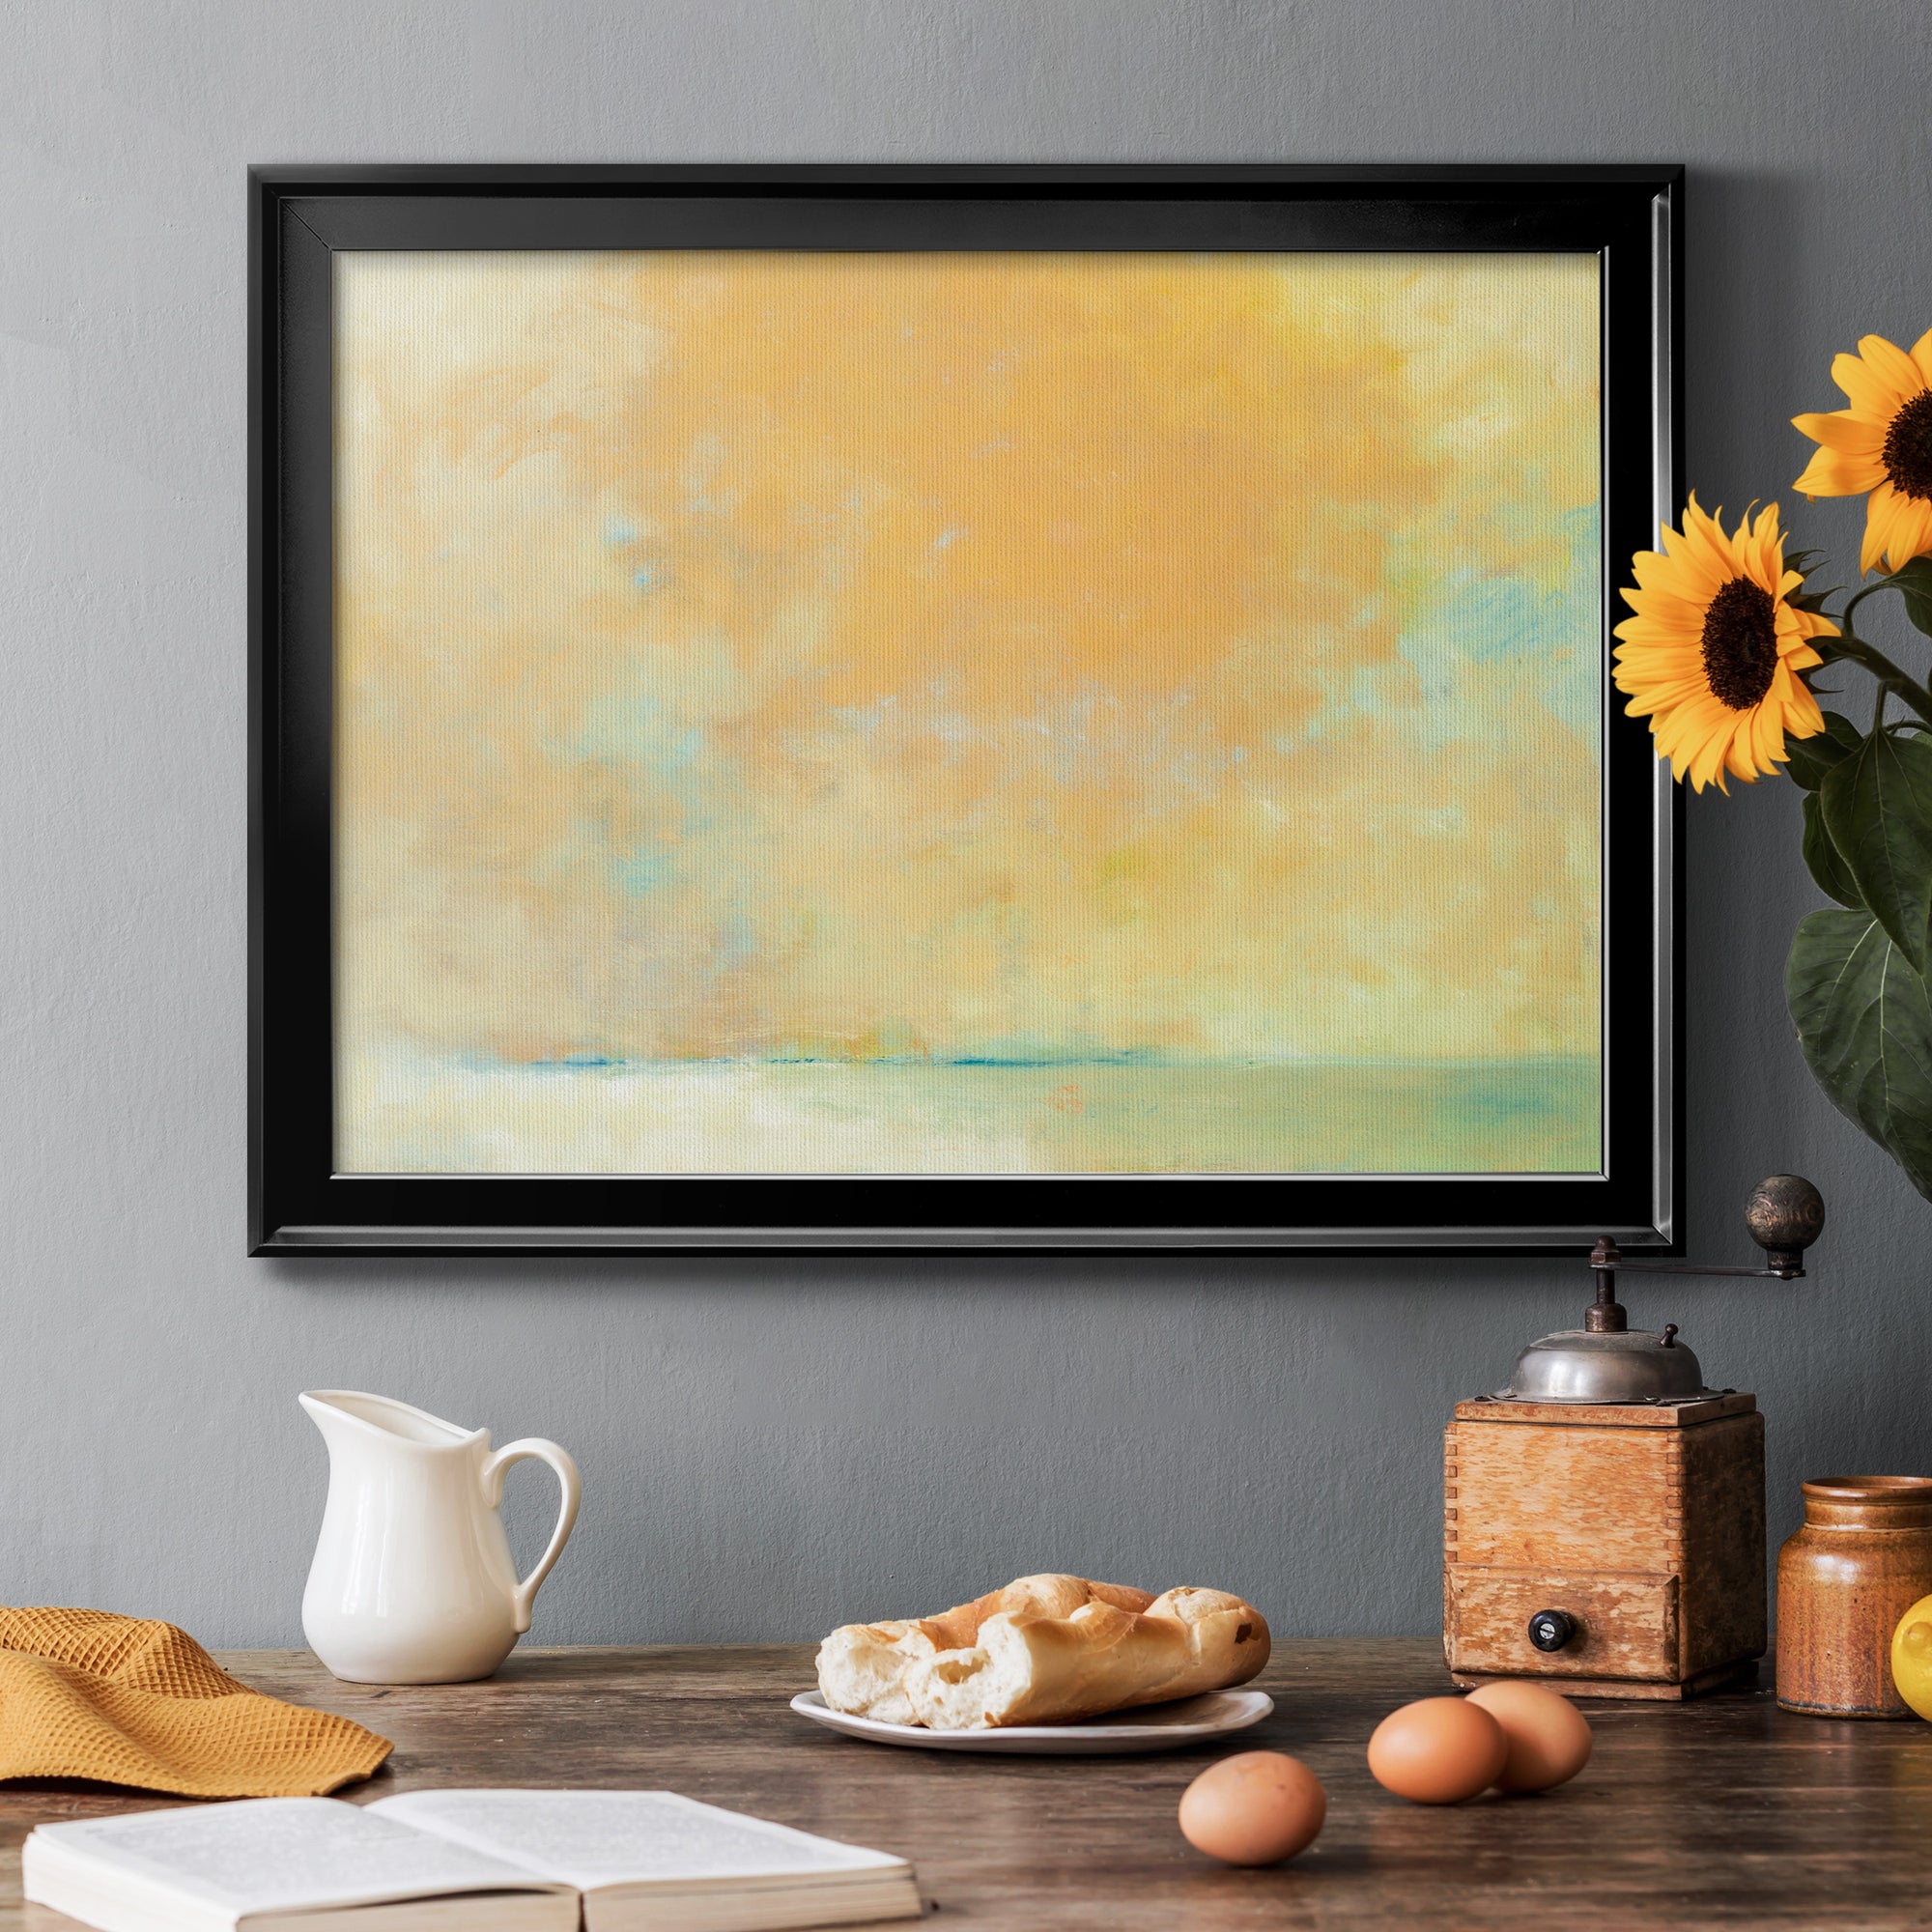 Tangerine Premium Classic Framed Canvas - Ready to Hang